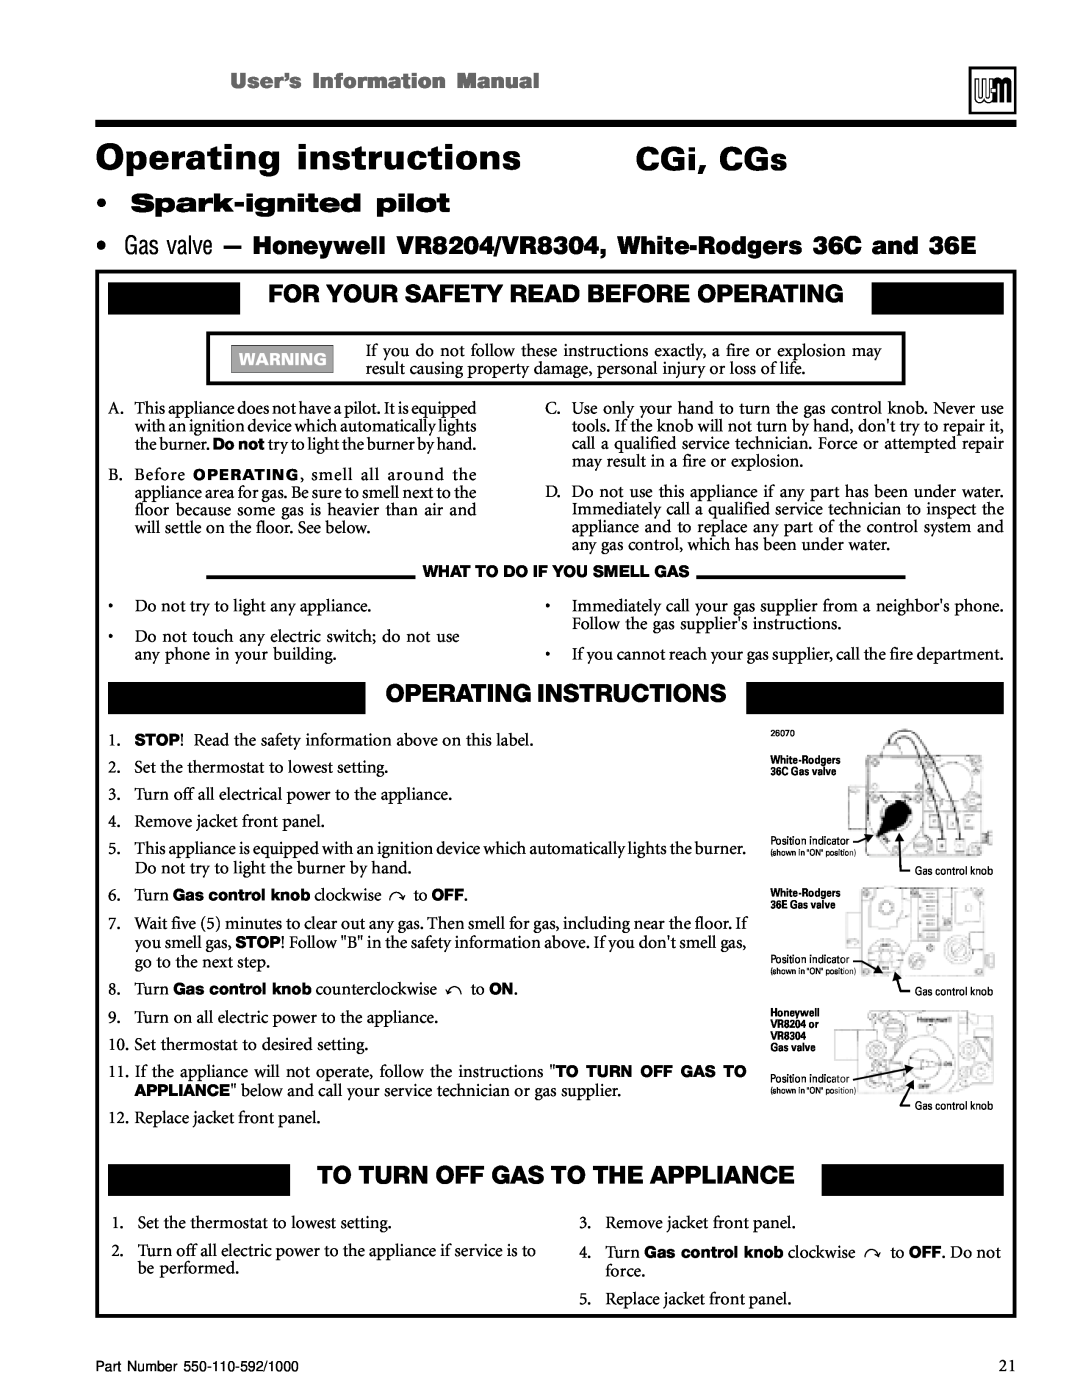 Weil-McLain CGi, CGs, For Your Safety Read Before Operating, To Turn Off Gas To The Appliance, UserísInformationManual 